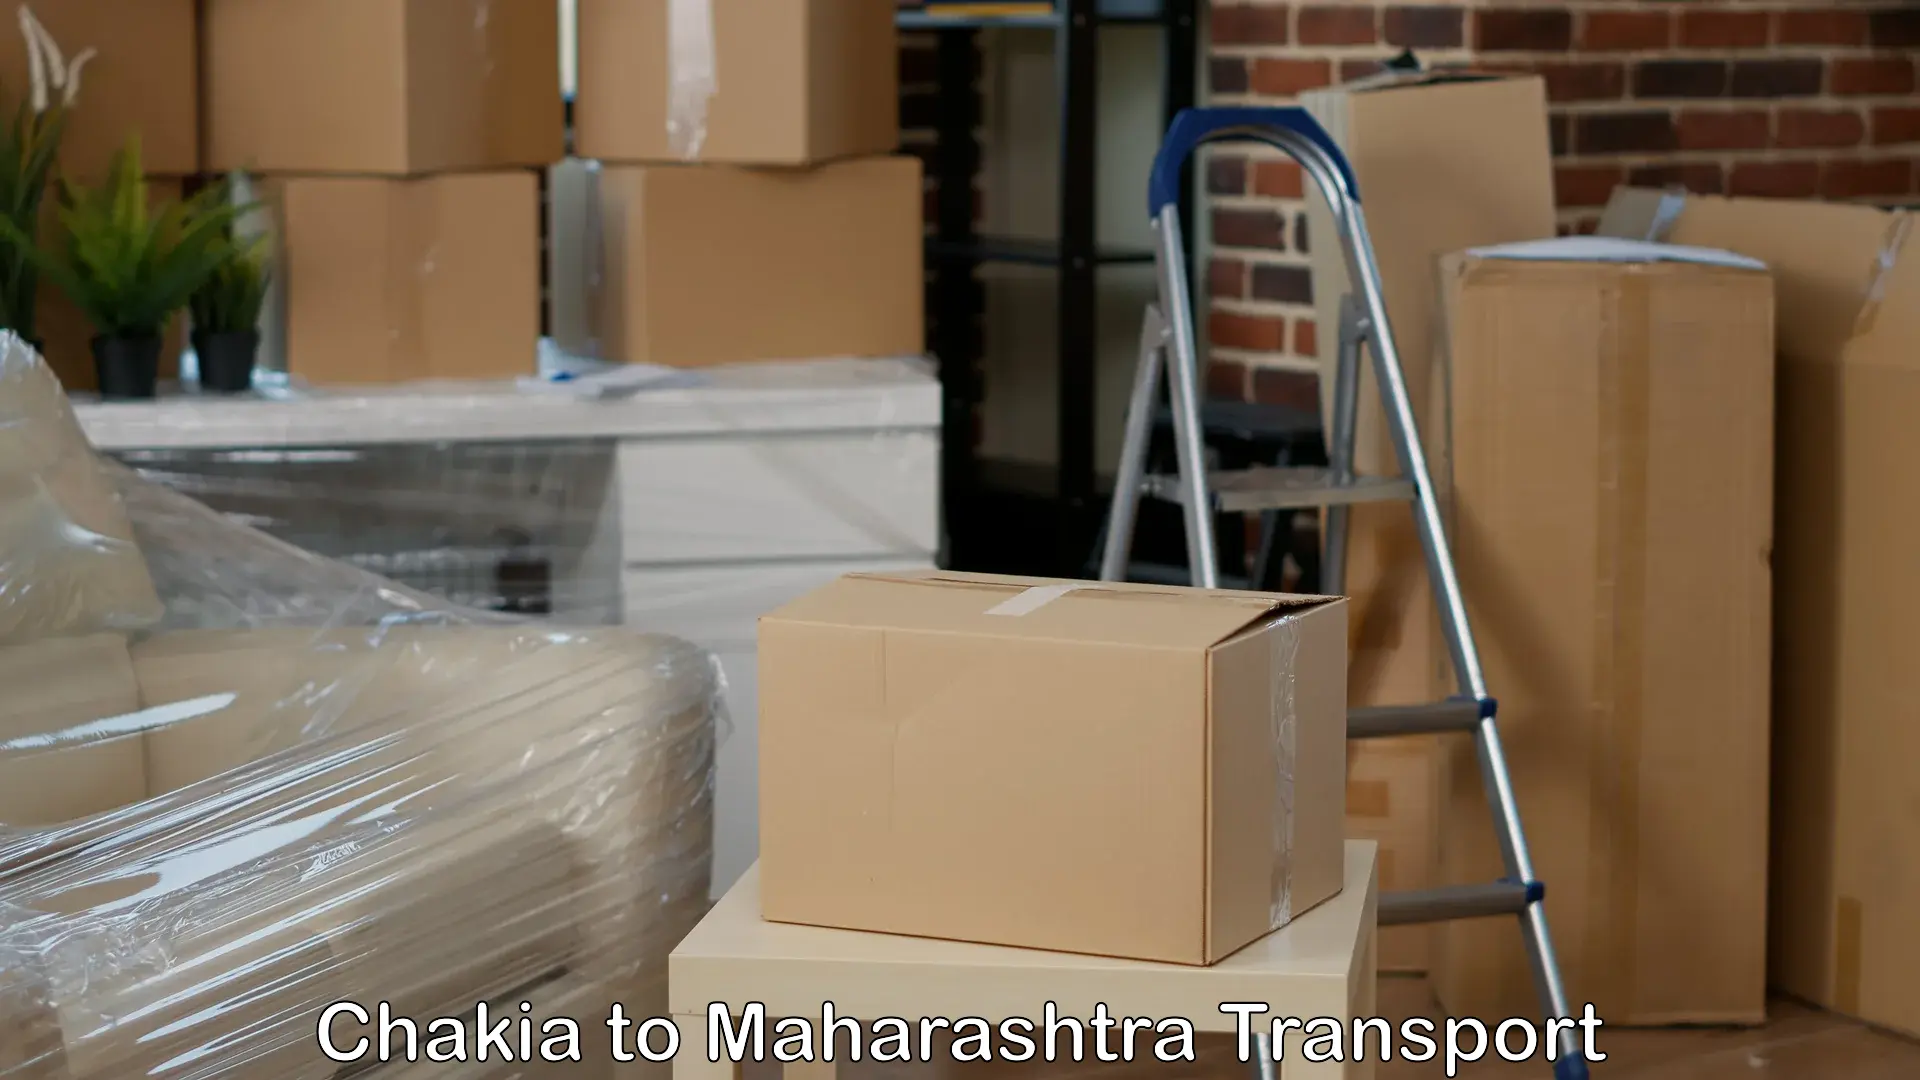 Truck transport companies in India Chakia to Nagothane